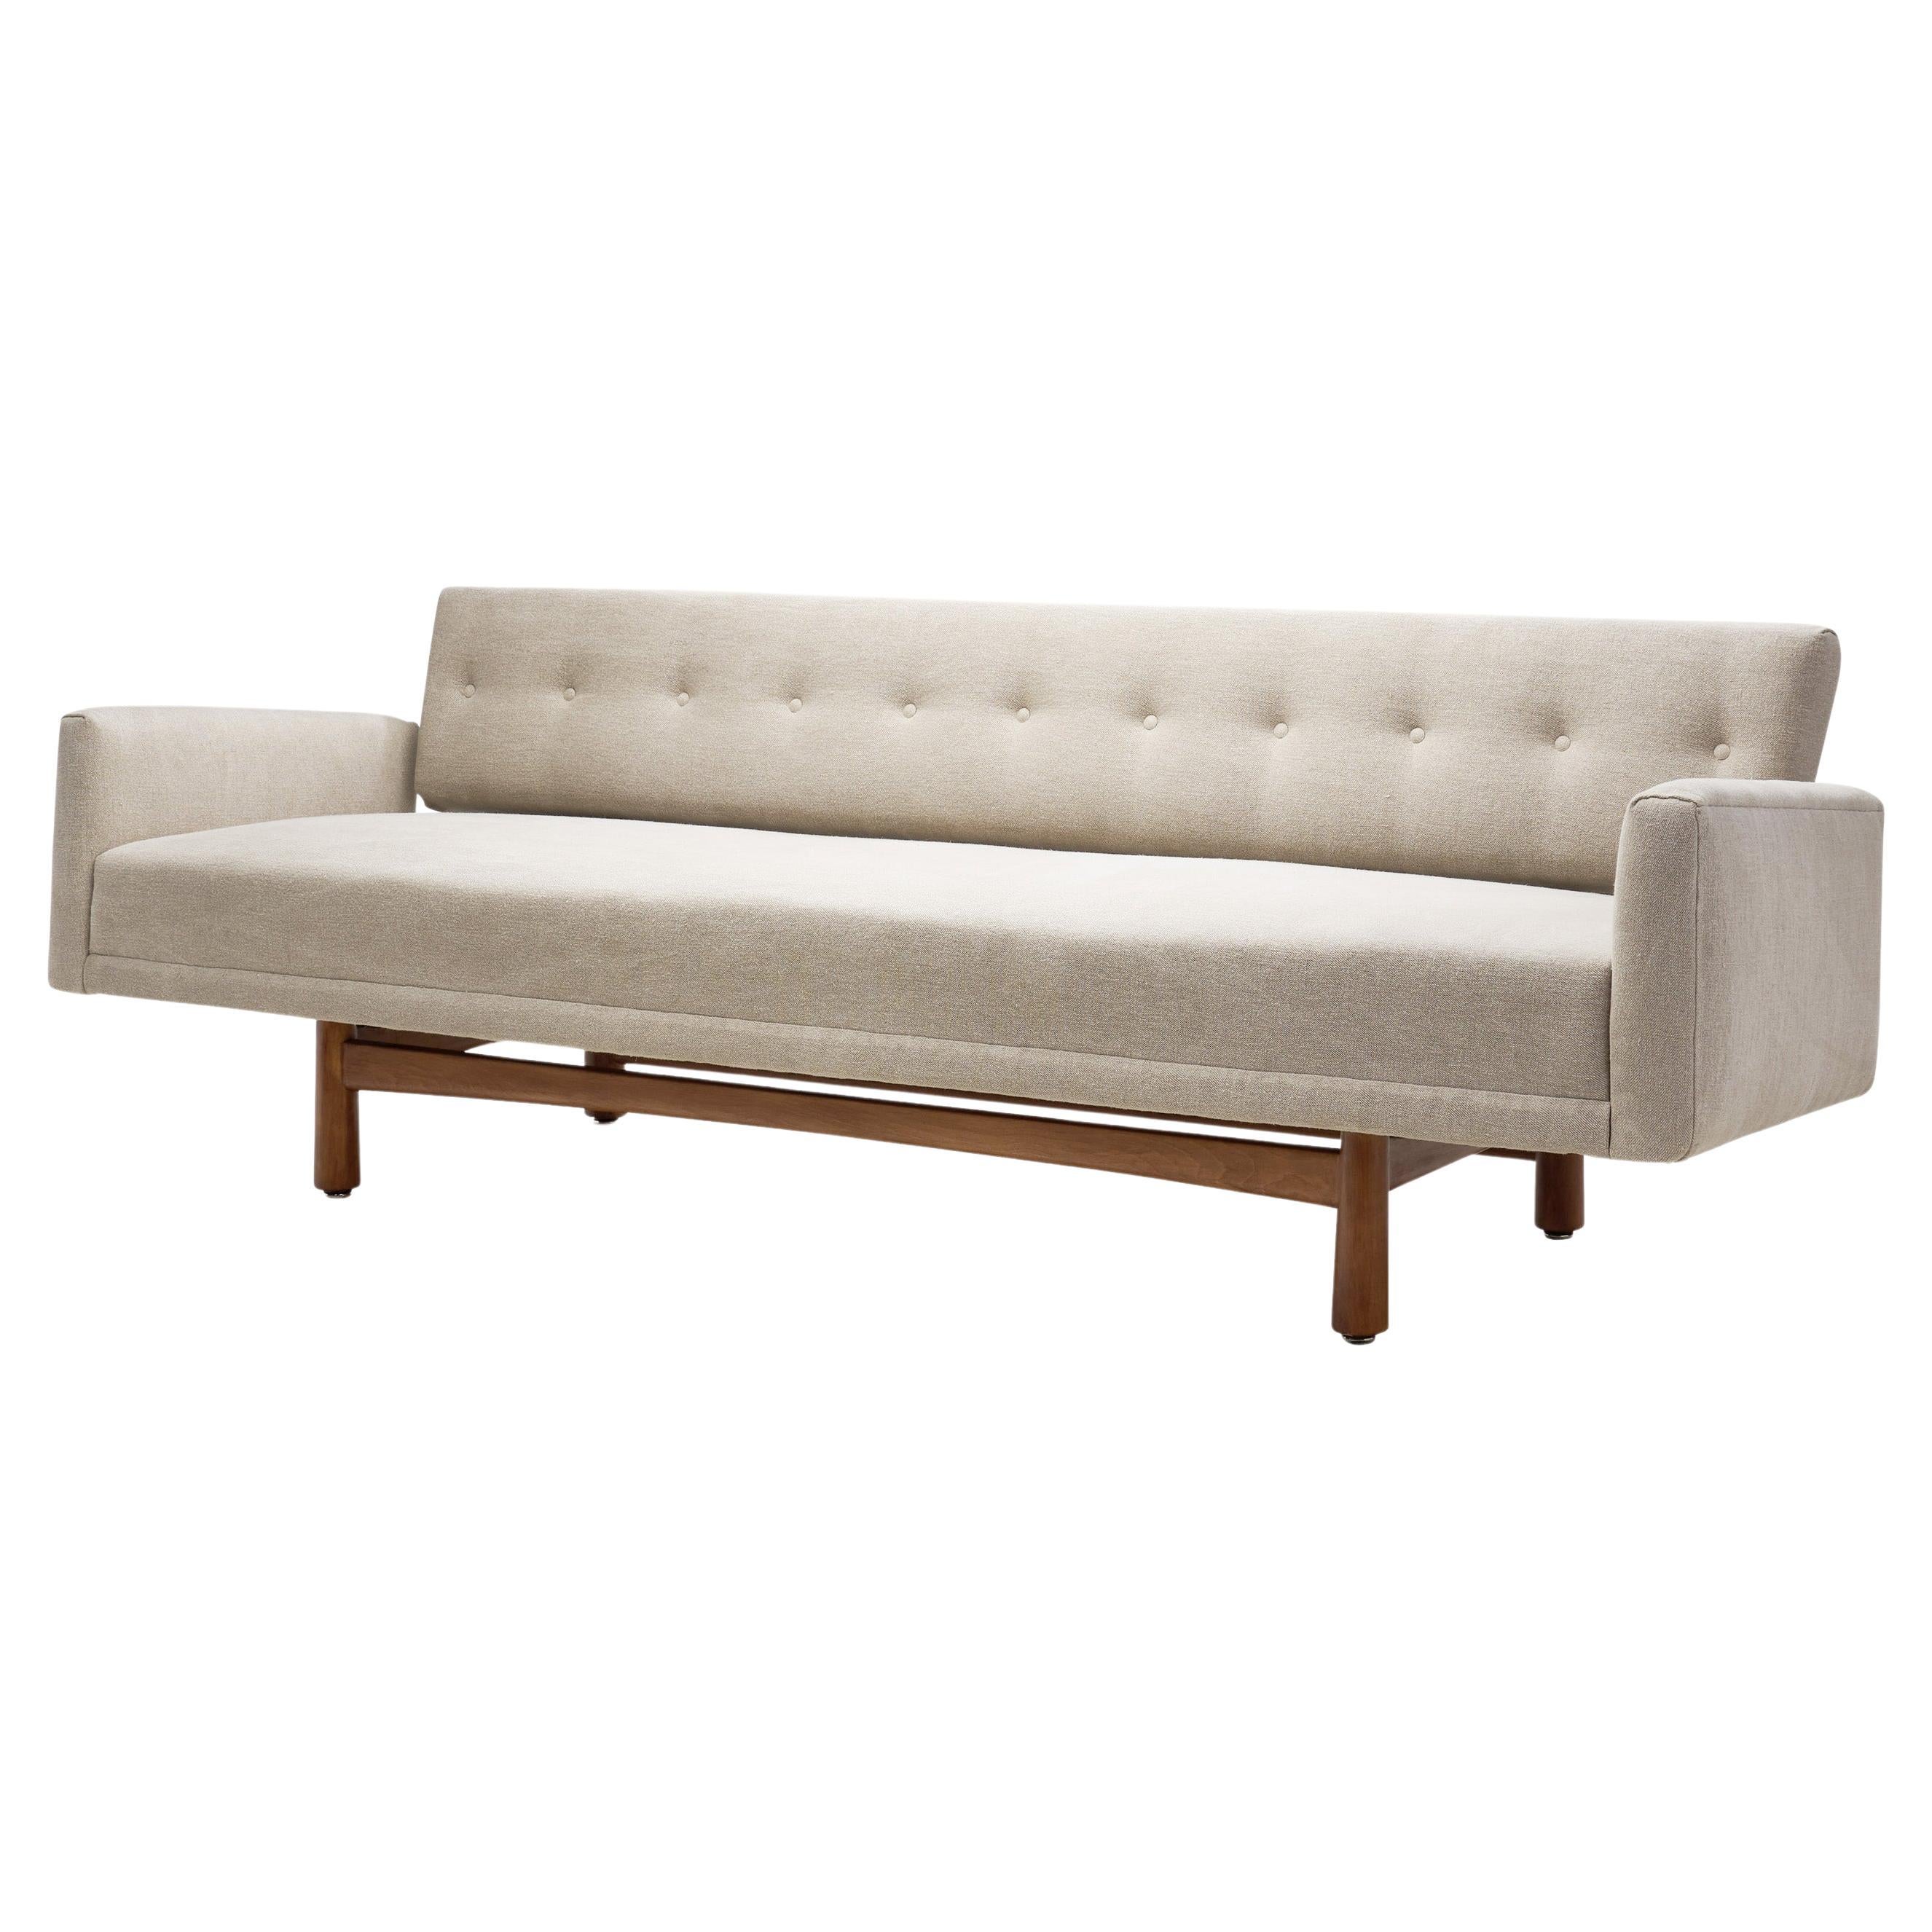 Edward Wormley "New York" Sofa Version 5316 for DUX, Sweden 1950s For Sale